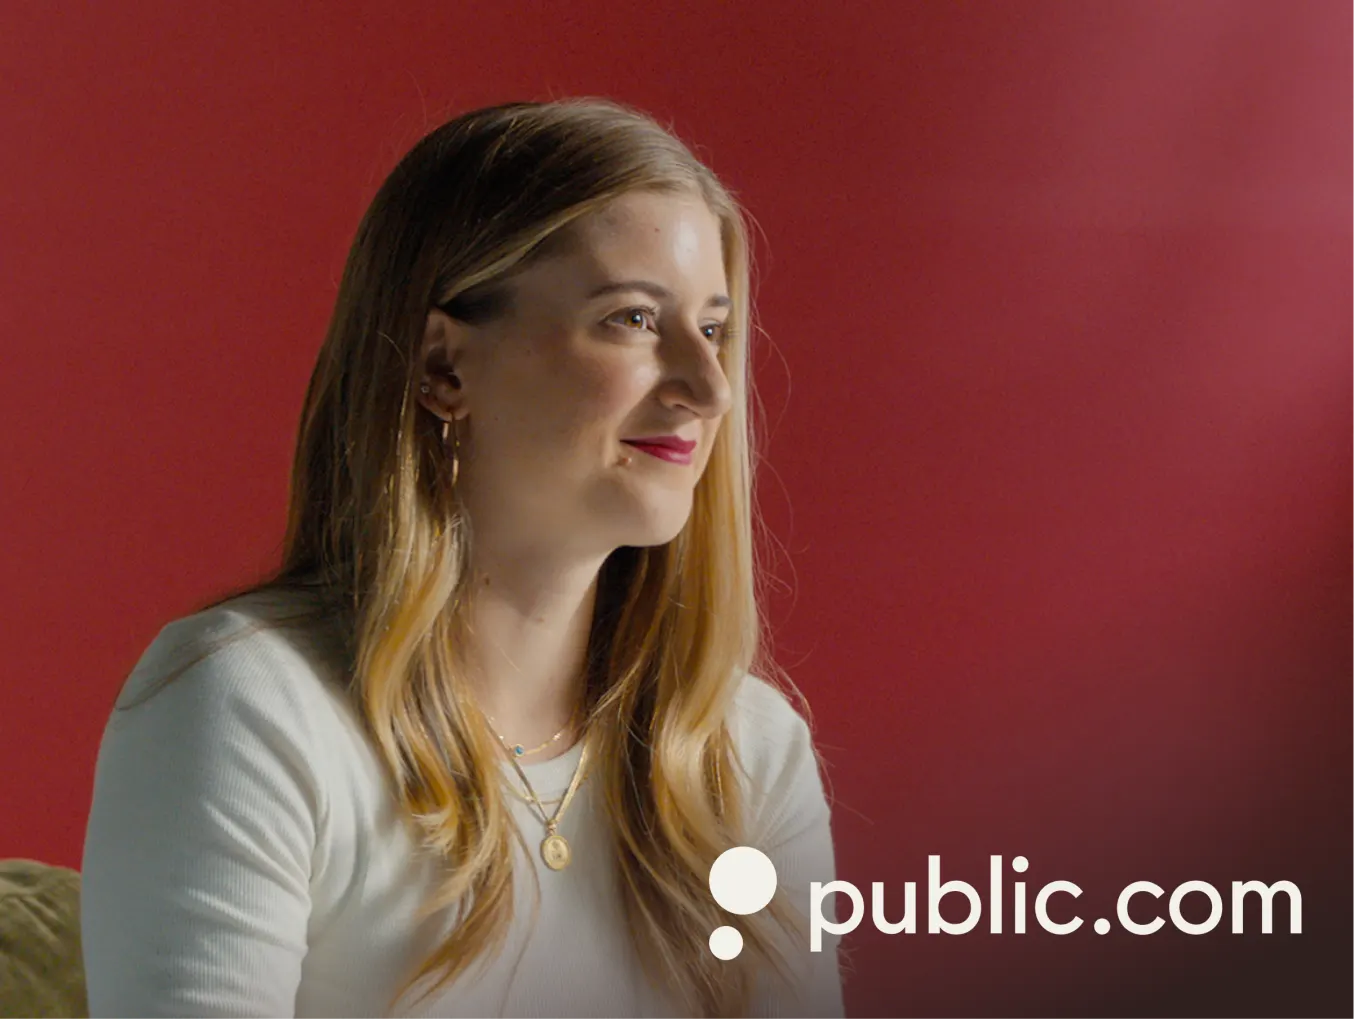 Public.com advertisement featuring MaryAlexa Divver, Head of Product, Infrastructure & Assets. She has long blonde hair, wearing a white top and gold jewelry, sitting against a red background. The Public.com logo is visible at the bottom right of the image.